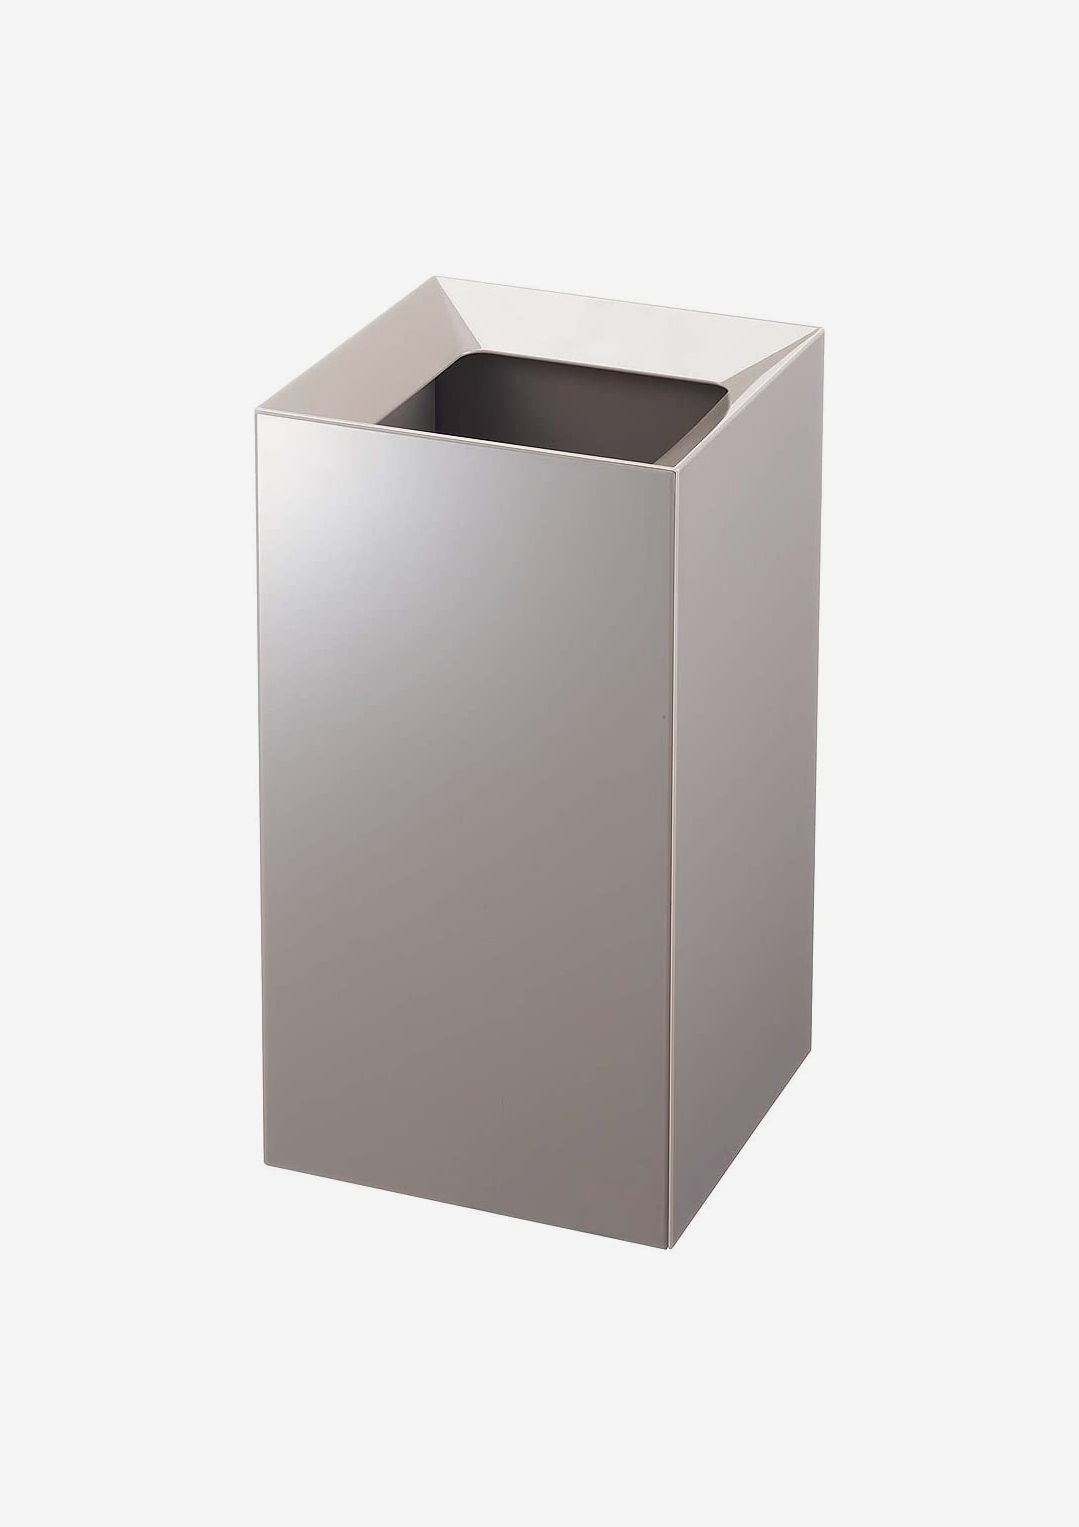 The Best Small Trash Can on  – Robb Report